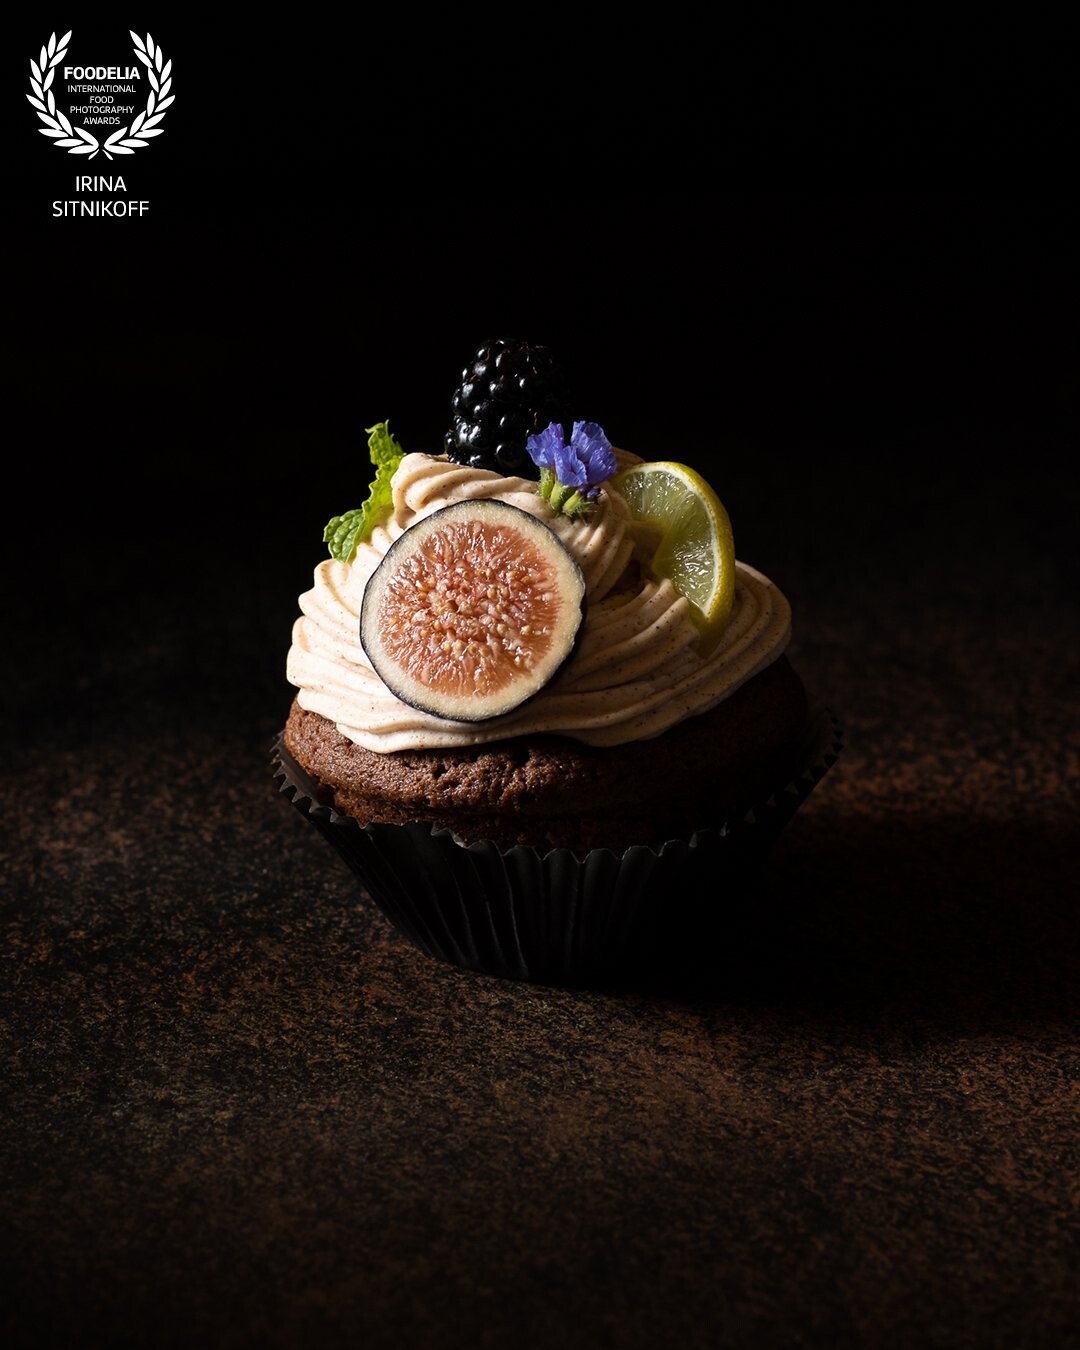 I have always been mesmerized by dark food photography which creates magic and mysterious atmosphere. I have developed and photographed this recipe of Chocolate Cupcakes with Hazelnuts & Cinnamon Cream Cheese for my Instagram culinary blog and decided to shoot it in minimalistic style to show off the beautiful presentation of the product itself, without any distractions on the background. This photo was shot in August and represents the last breath of summer, a sweet season of figs & berries.  The soft chocolate sponge cupcake covered with silky and smooth cinnamon cream cheese with vanilla, accompanied by adorable aromas of figs, berries, mint & lime - the taste is irresistible. I wanted to express that feeling in this photo.